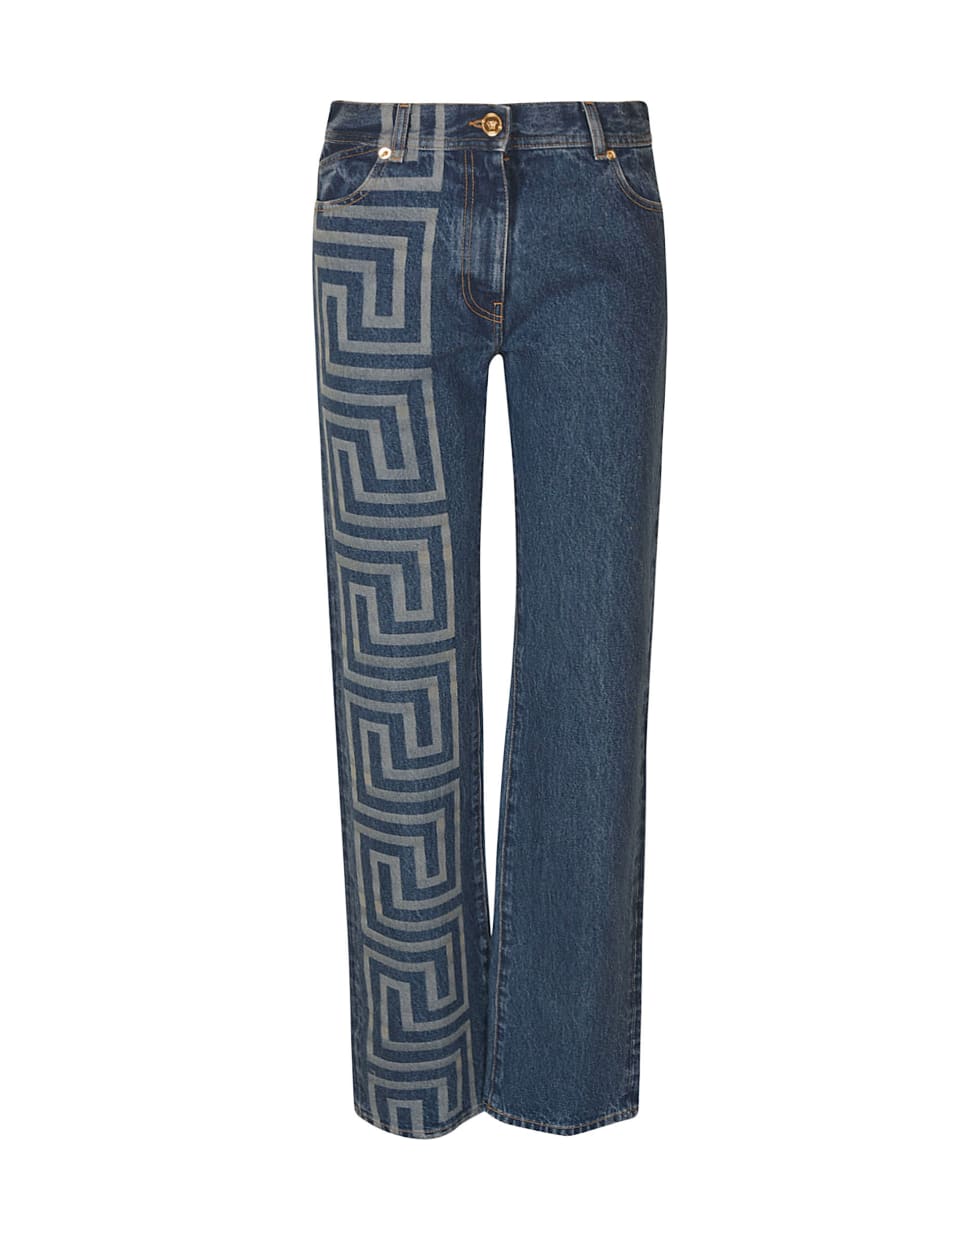 Versace Printed Straight Jeans - Stone Wash